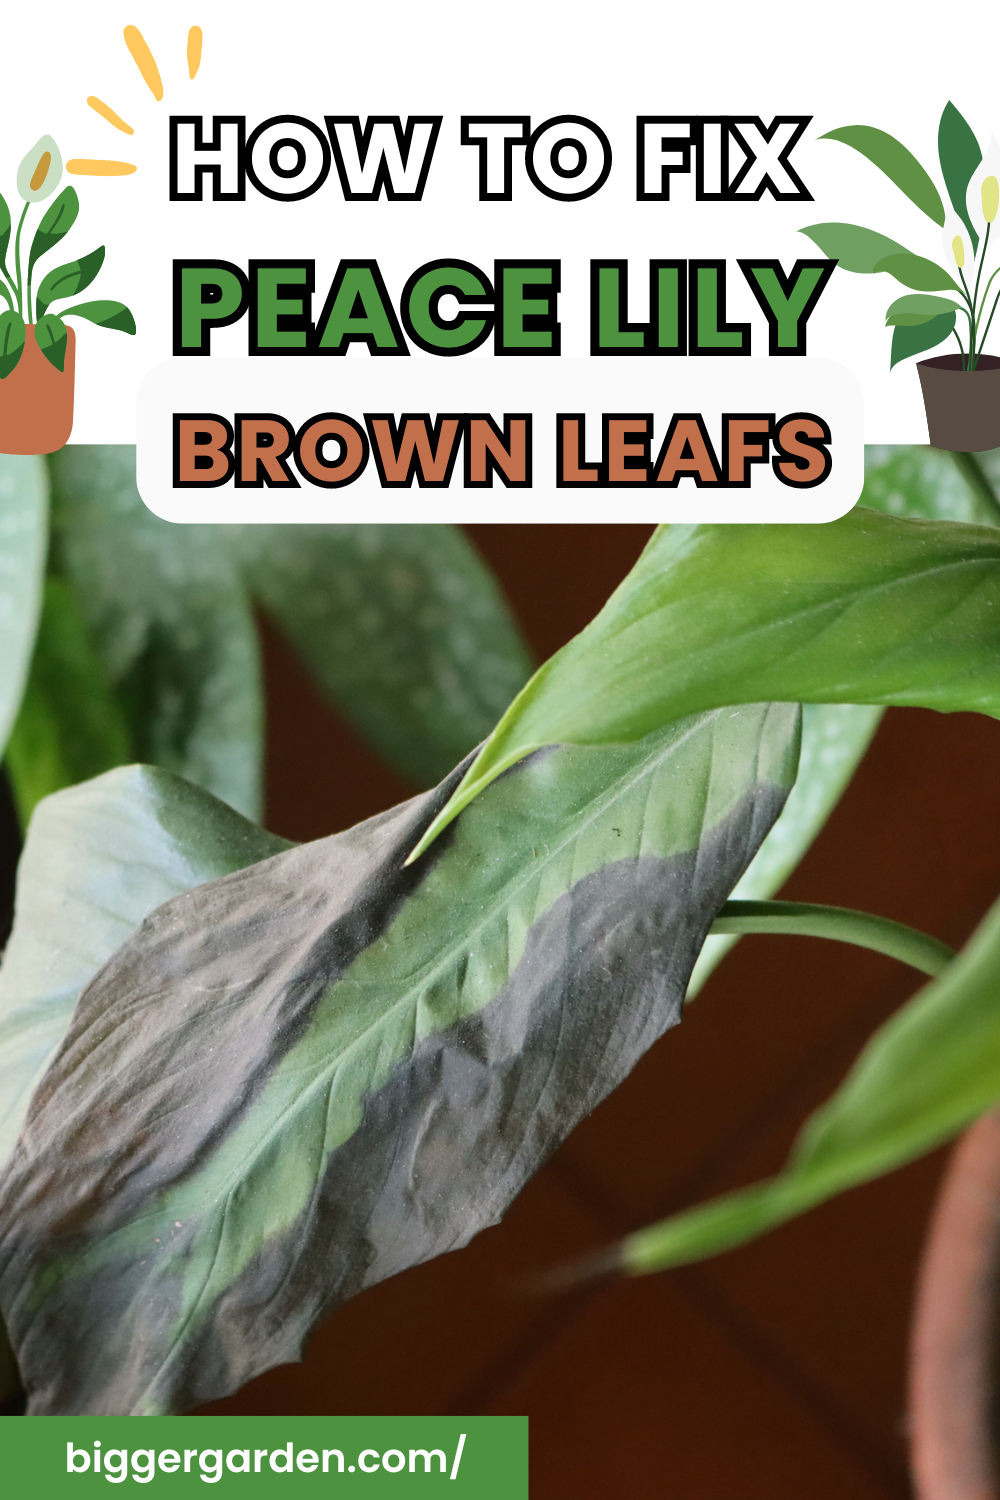 PEACE LILY BROWN LEAFS 1